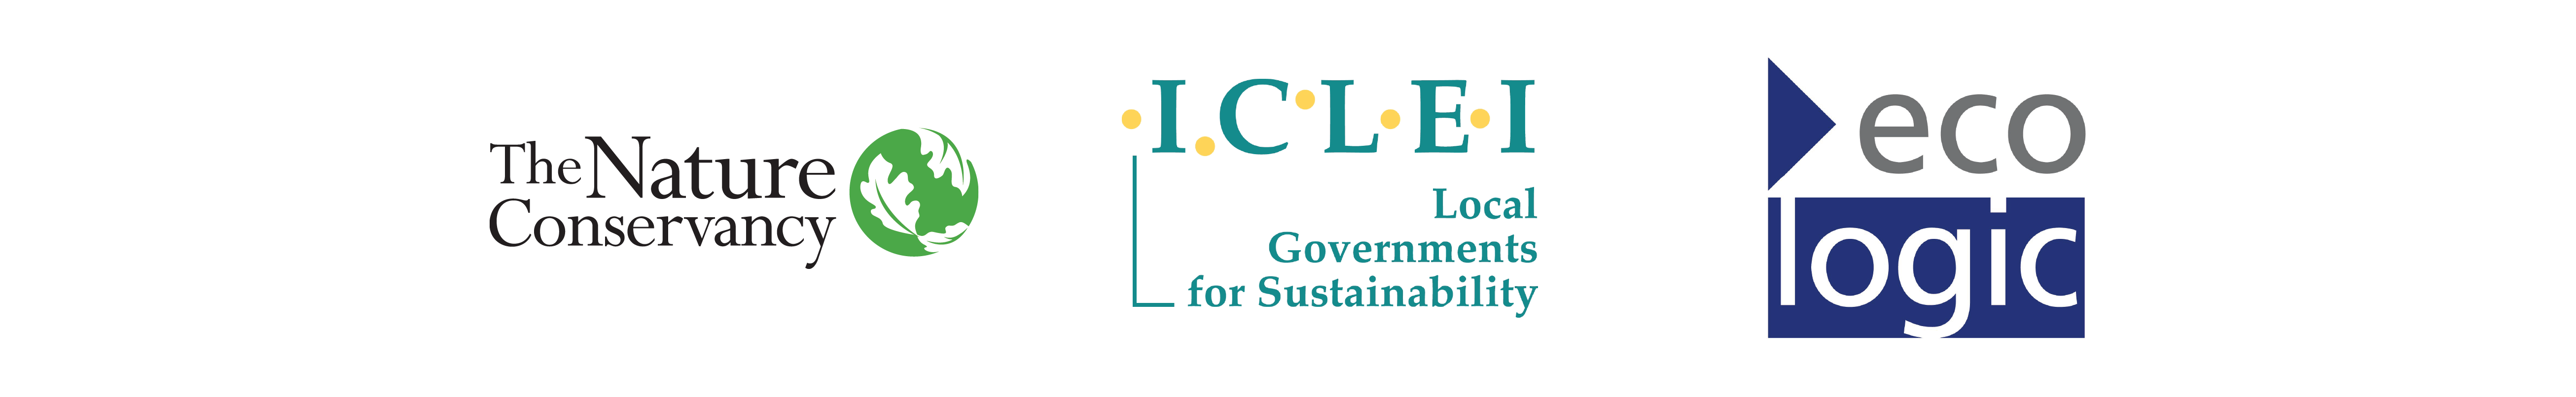 three logos, The Nature Conservancy, ICLEI, and EcoLogic